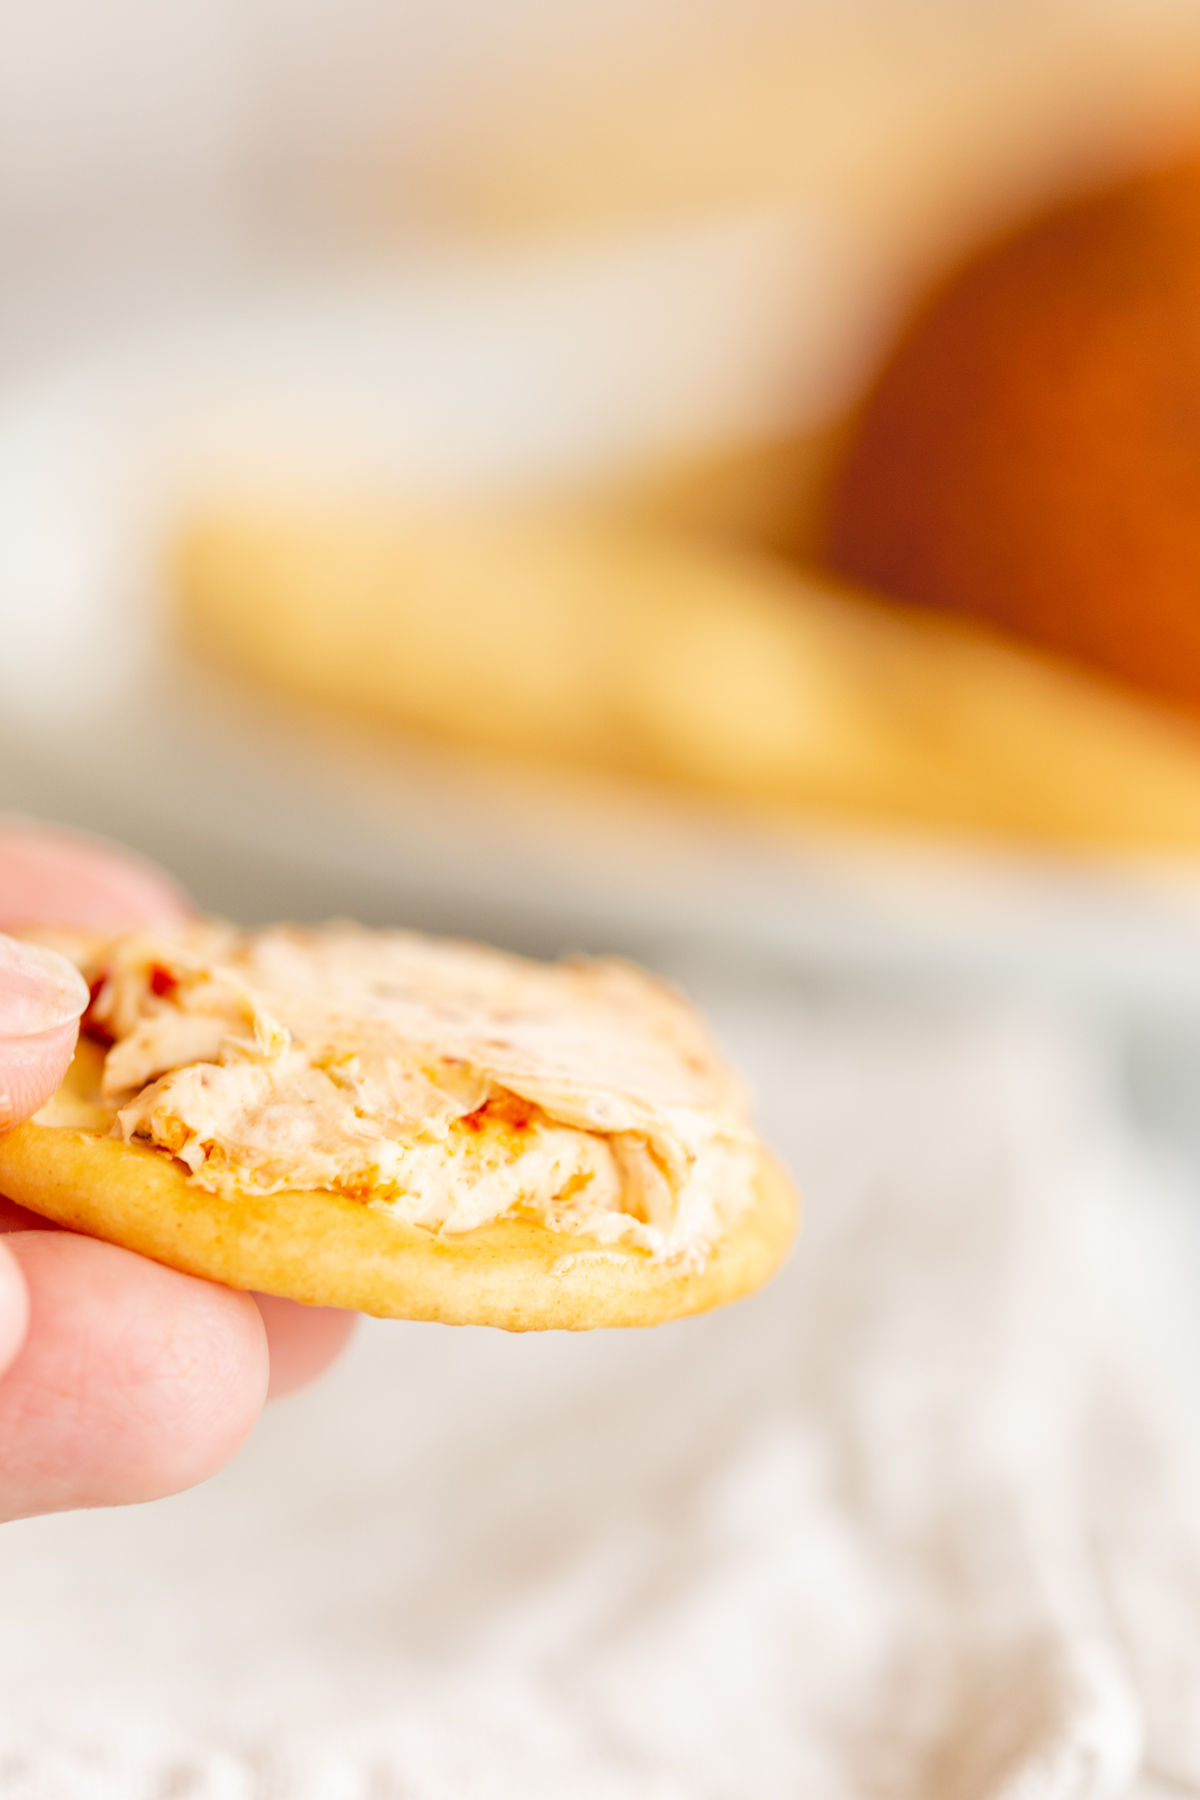 A hand holding a cracker topped with a spread from a spicy cheeseball.